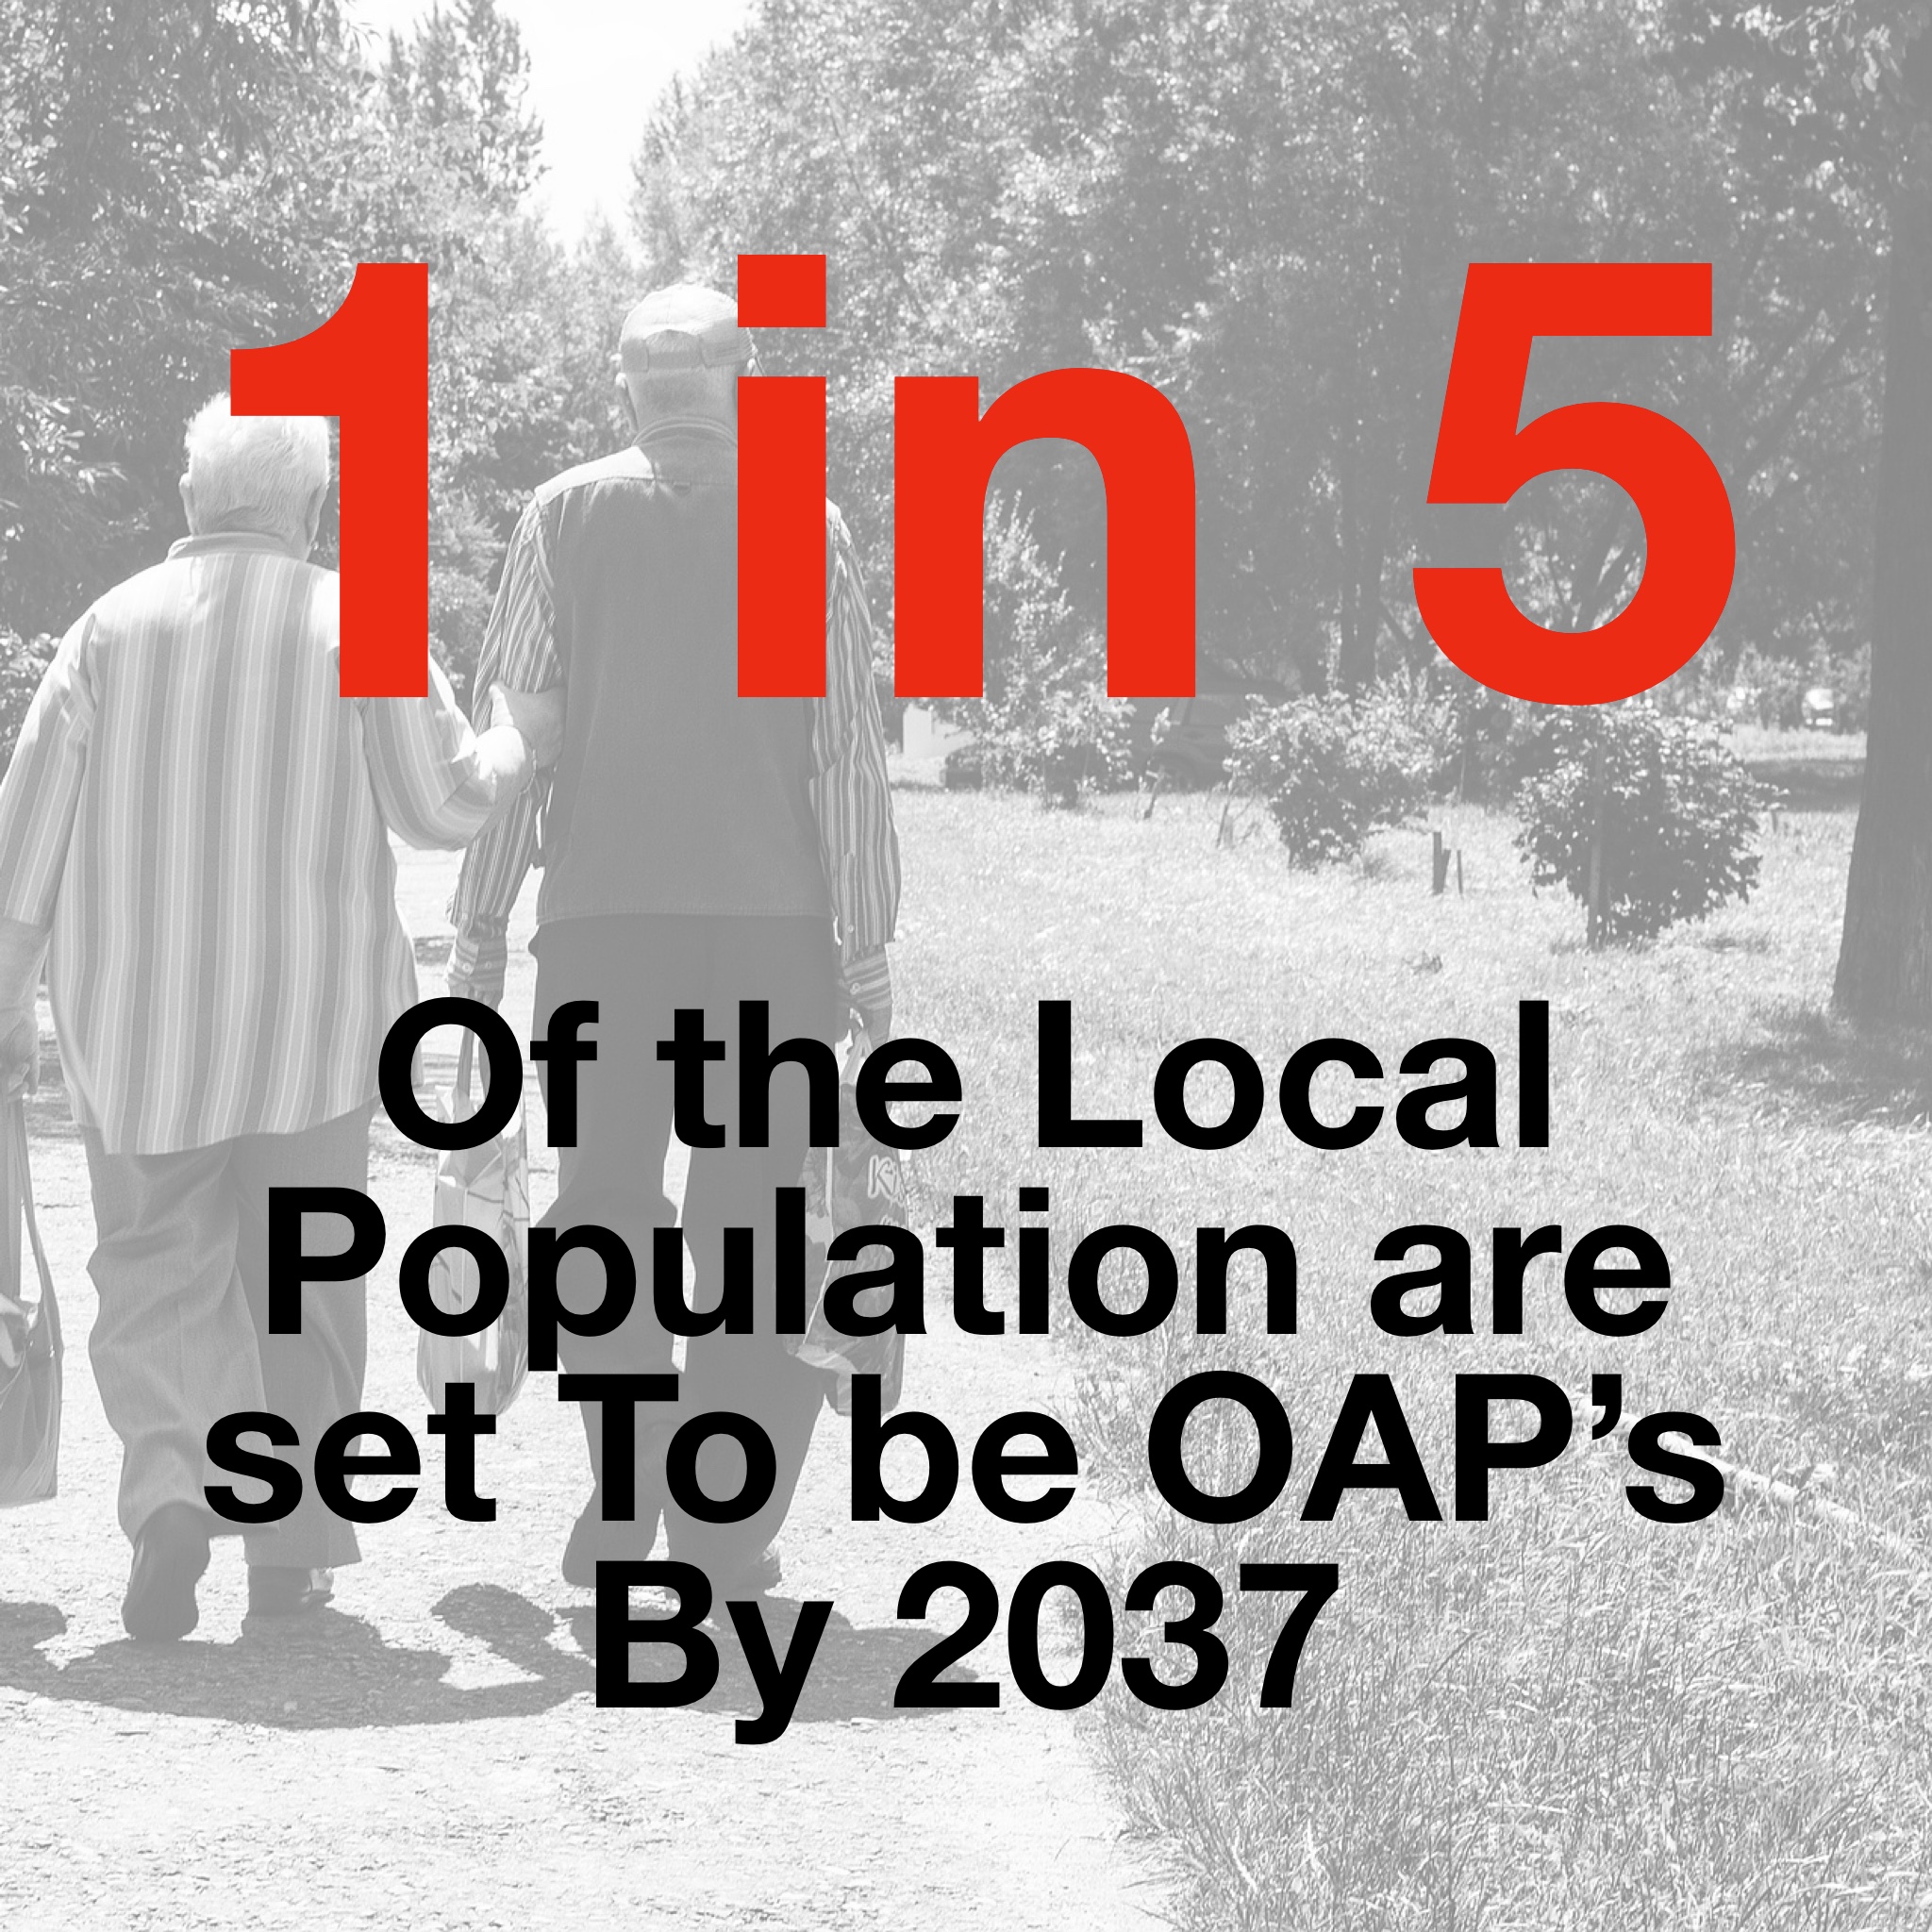 As OAP's set to rise to 1...